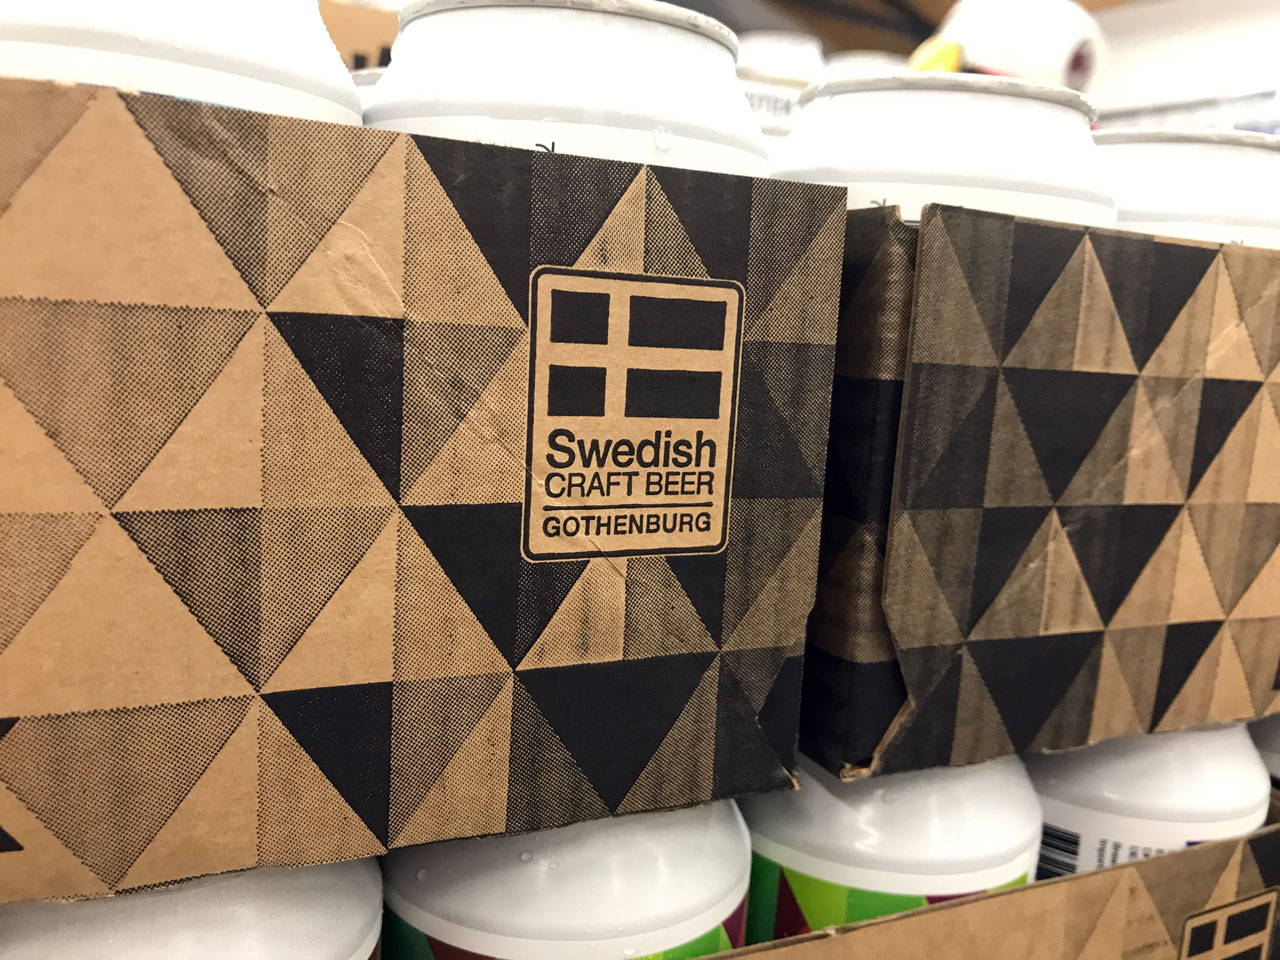 The Swedish Craft Beer Gothenburg logo on a can tray from Beerbliotek's brewery.